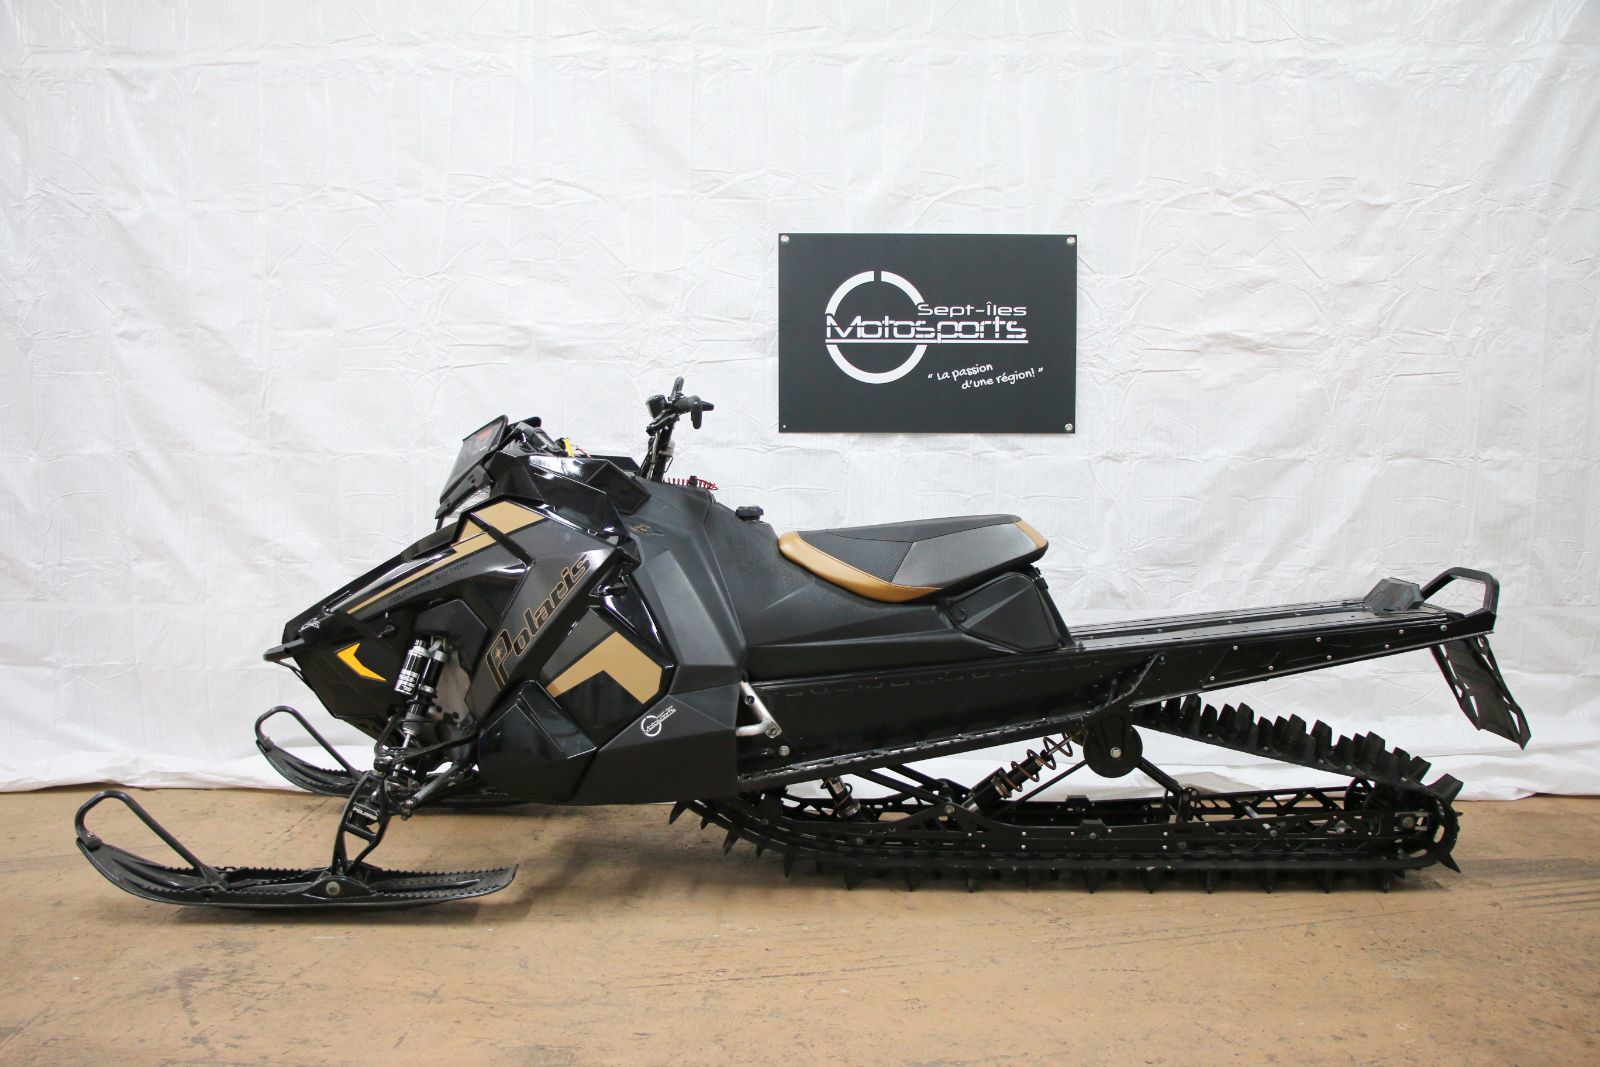 Sept Iles Motosports Snowmobile In Our Used Inventory In Sept Iles